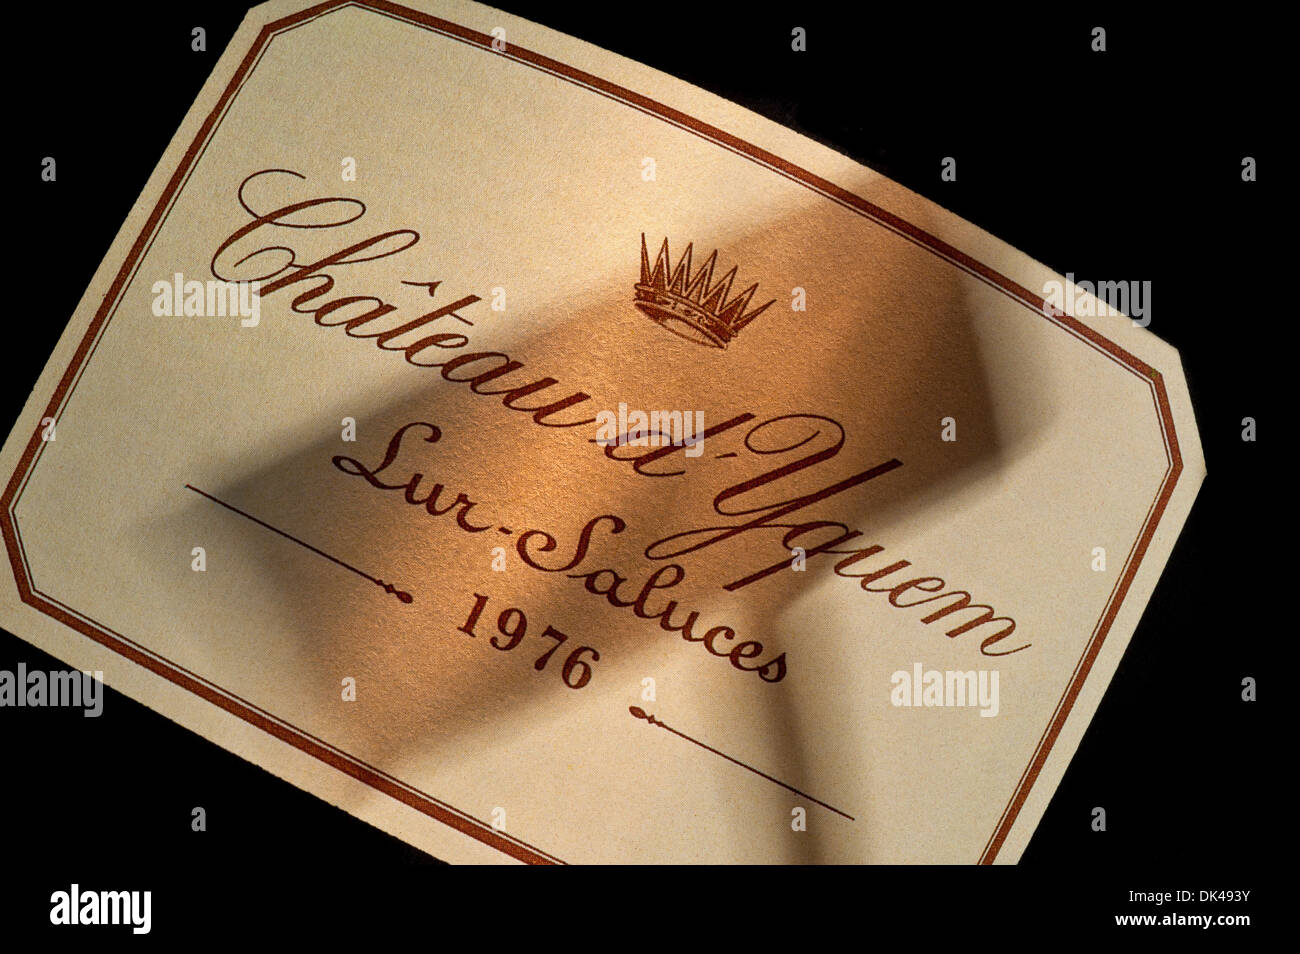 Shadow of auctioneers hammer on 1976 Chateau d'Yquem white wine label French Premier Cru Supérieur Sauternes Bordeaux France Stock Photo